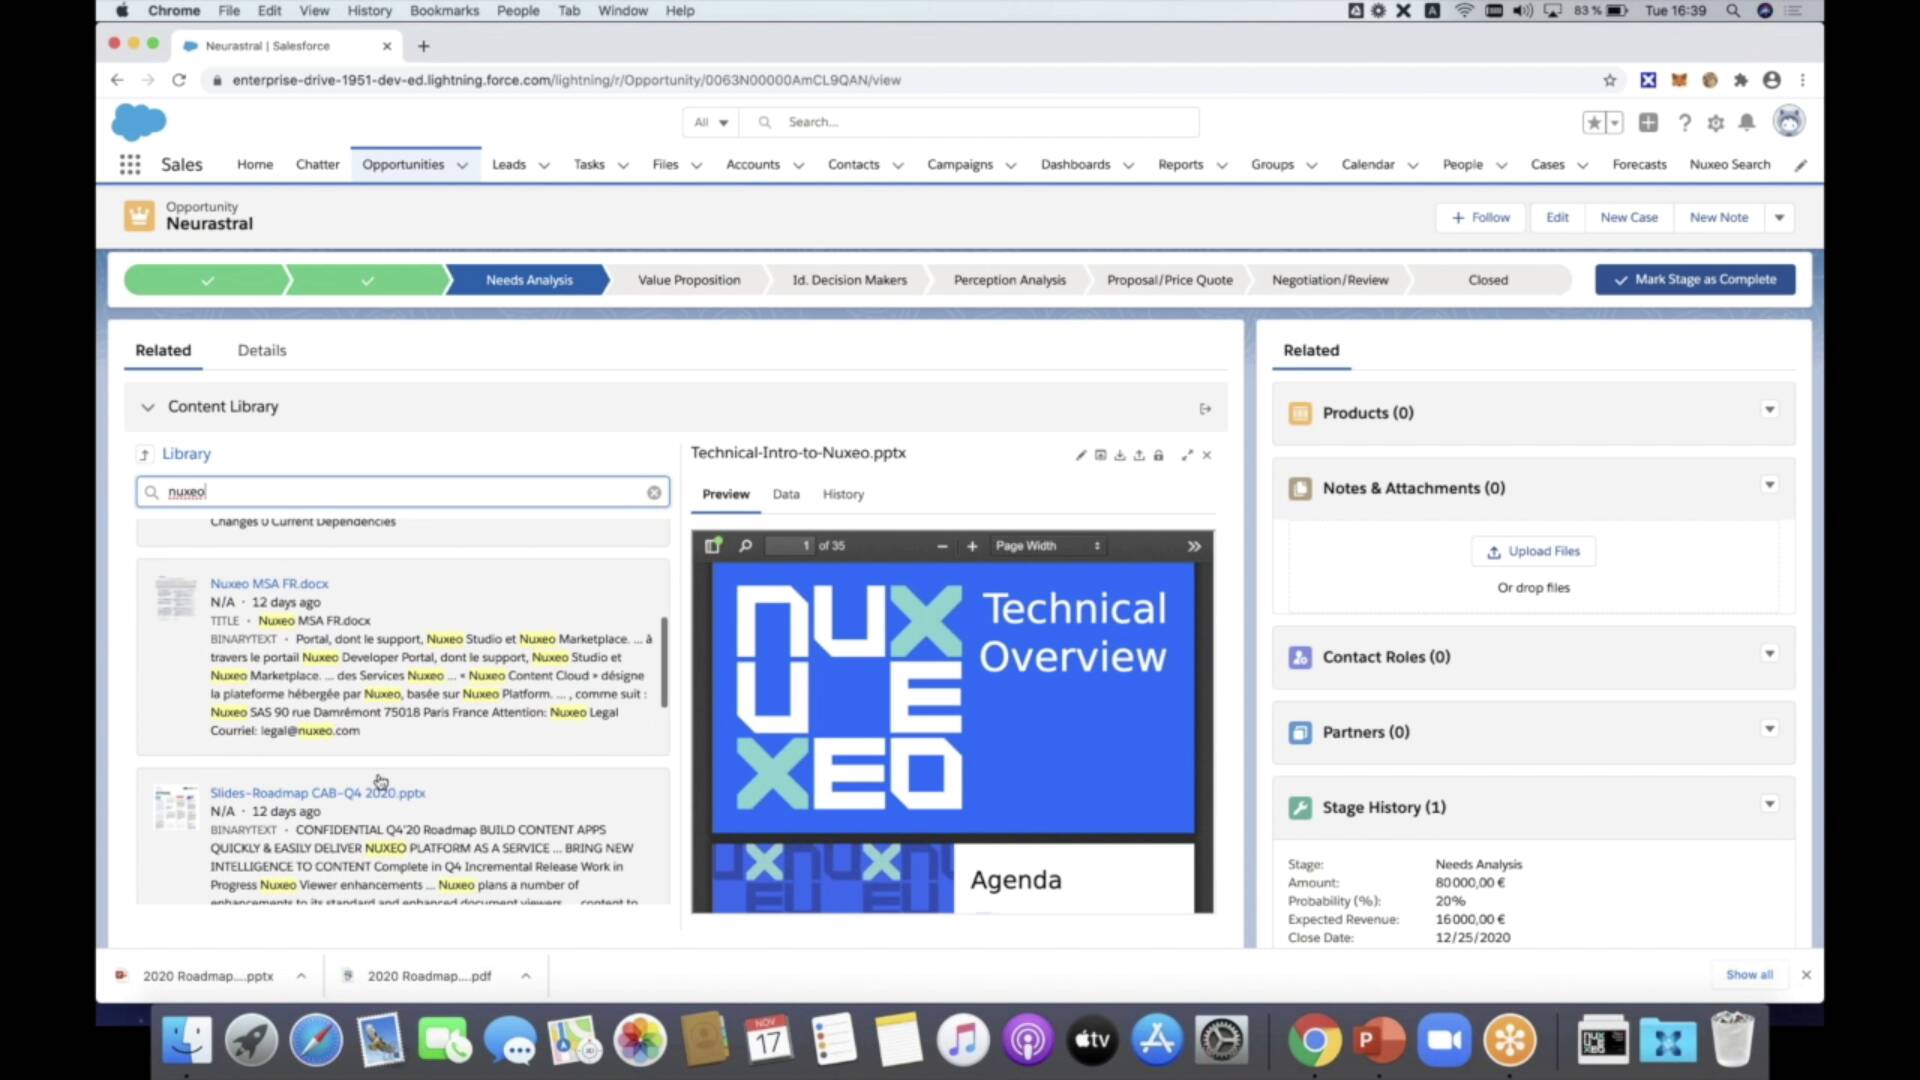 Nuxeo's Salesforce for DAM and ECM connector enables efficient content management and digital asset management directly within the SFDC interface.